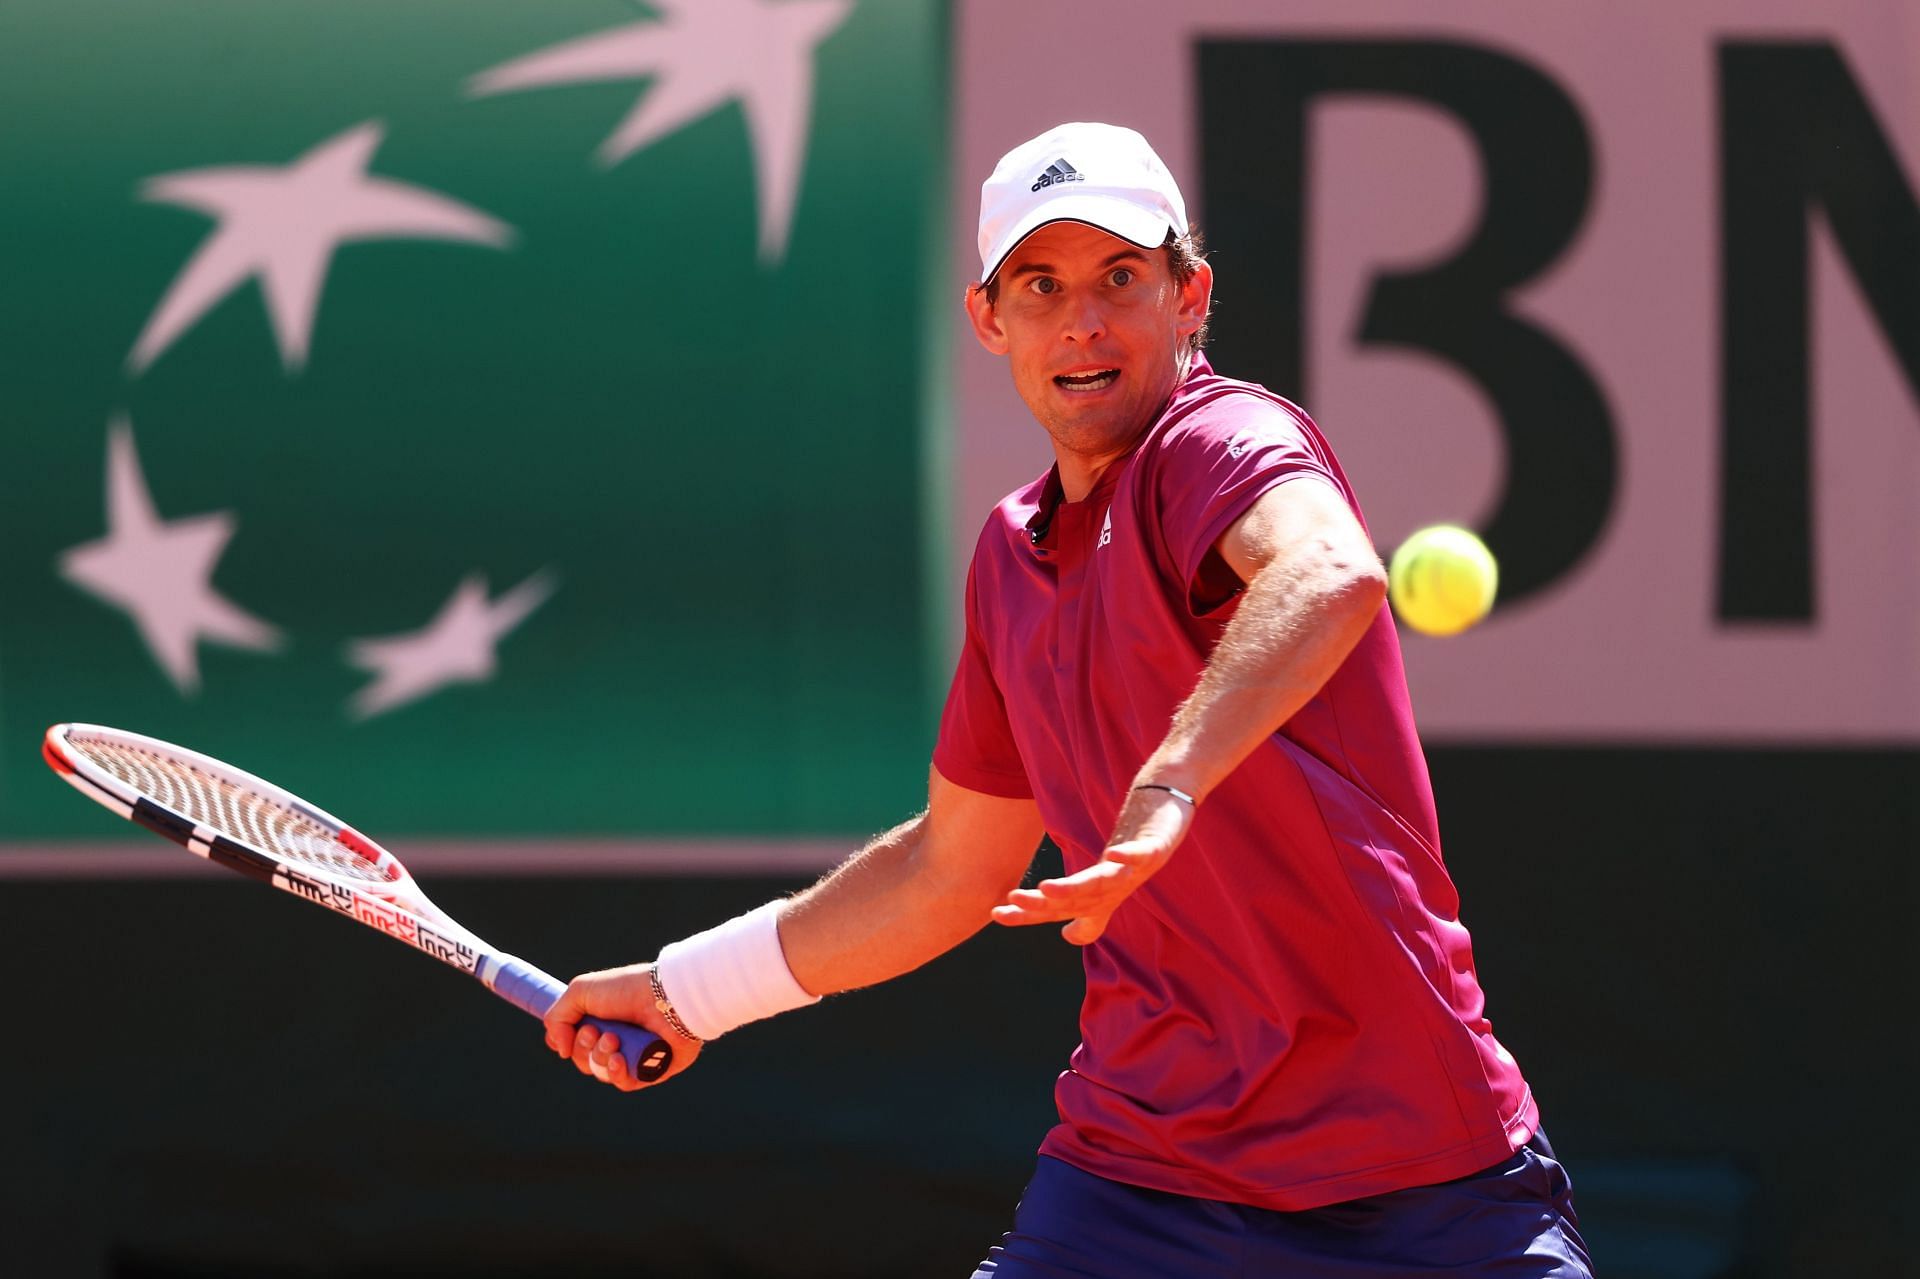 Dominic Thiem will be hoping for a return to form at the Estoril Open